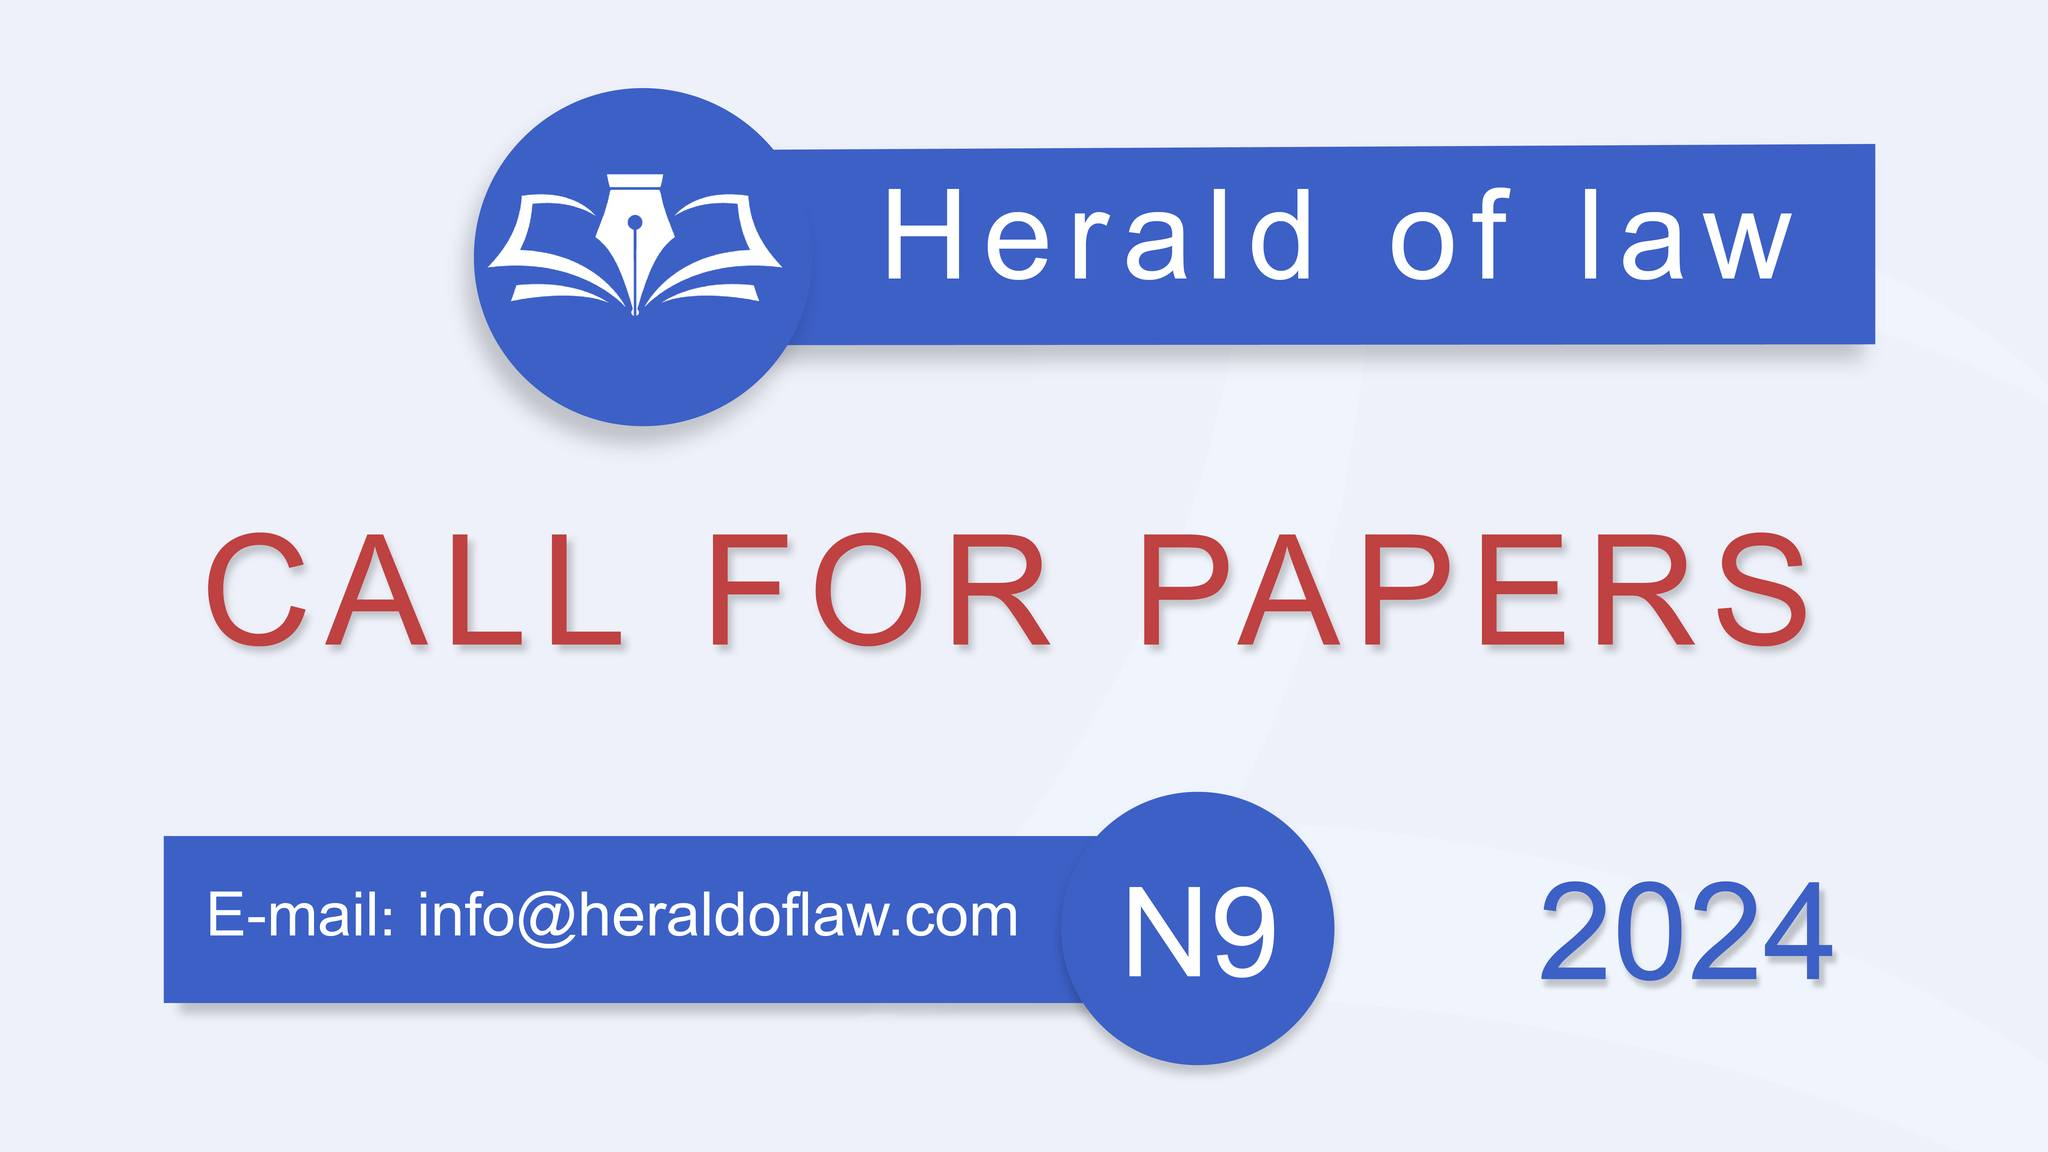 International Scientific Journal “Herald of Law” Announces Article Competition